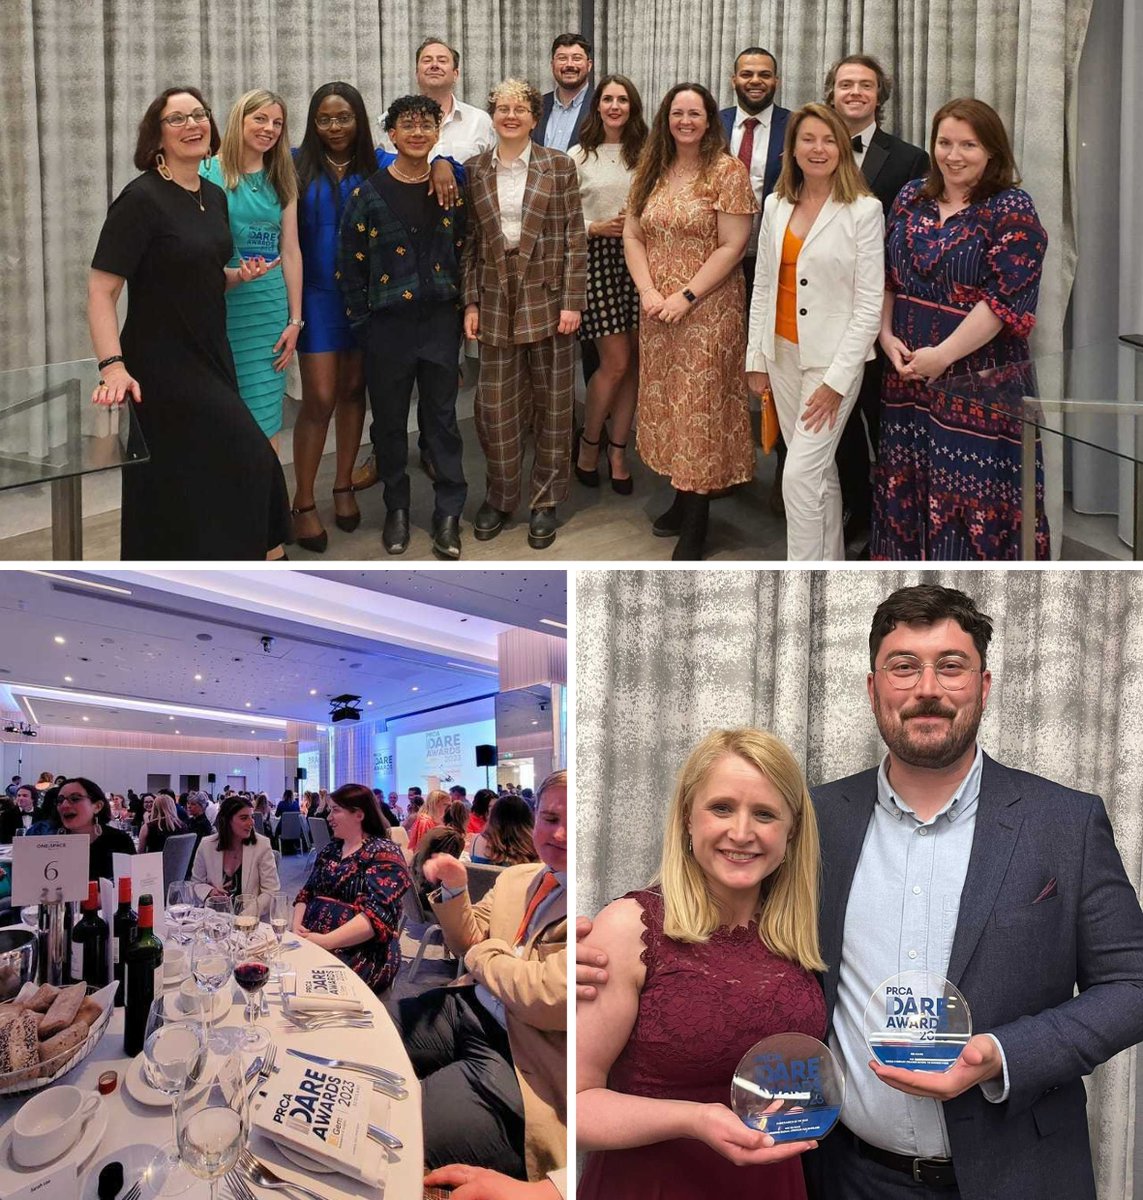 #ICYMI: We bagged a brace at last night's @PRCA_Scotland #PRCADareAwards - bringing home both Launch of the Year and B2B Campaign awards! 🏆

Big thanks to @NRobotarium, @ConvergeC & @DecodeME for letting us tell their incredible stories & congrats to our extraordinary team 🥳